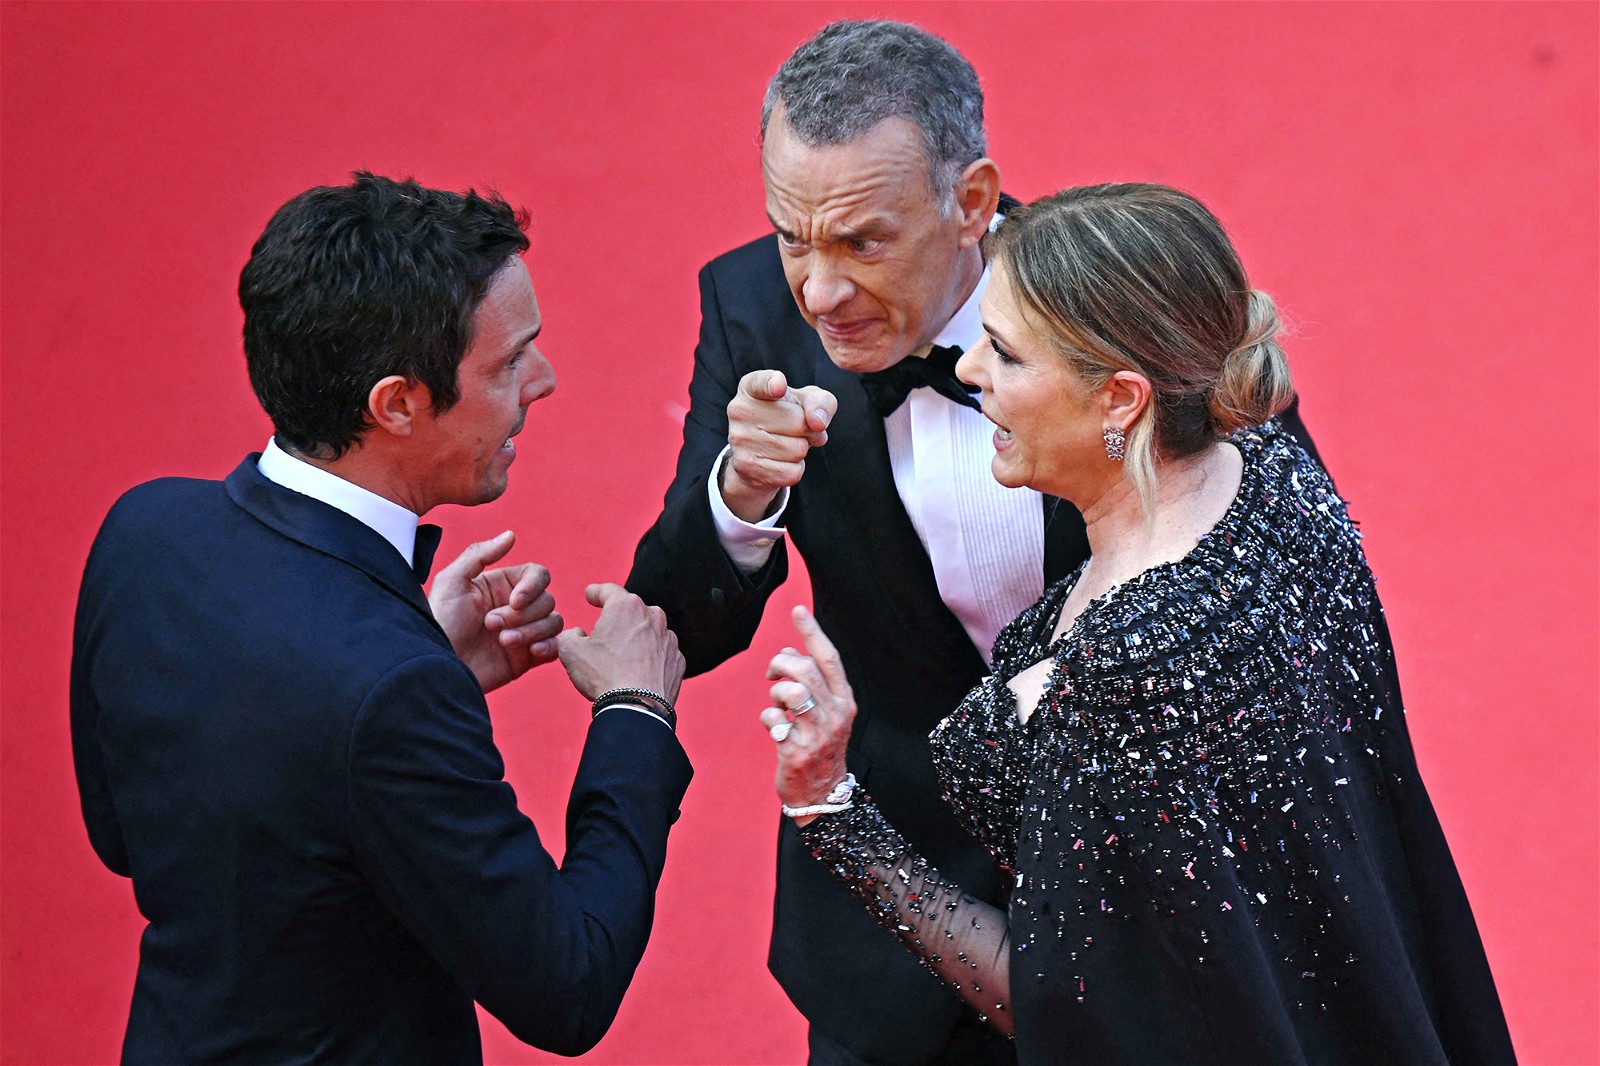 Tom Hanks and Rita Wilson appear to lose their cool at a staffer